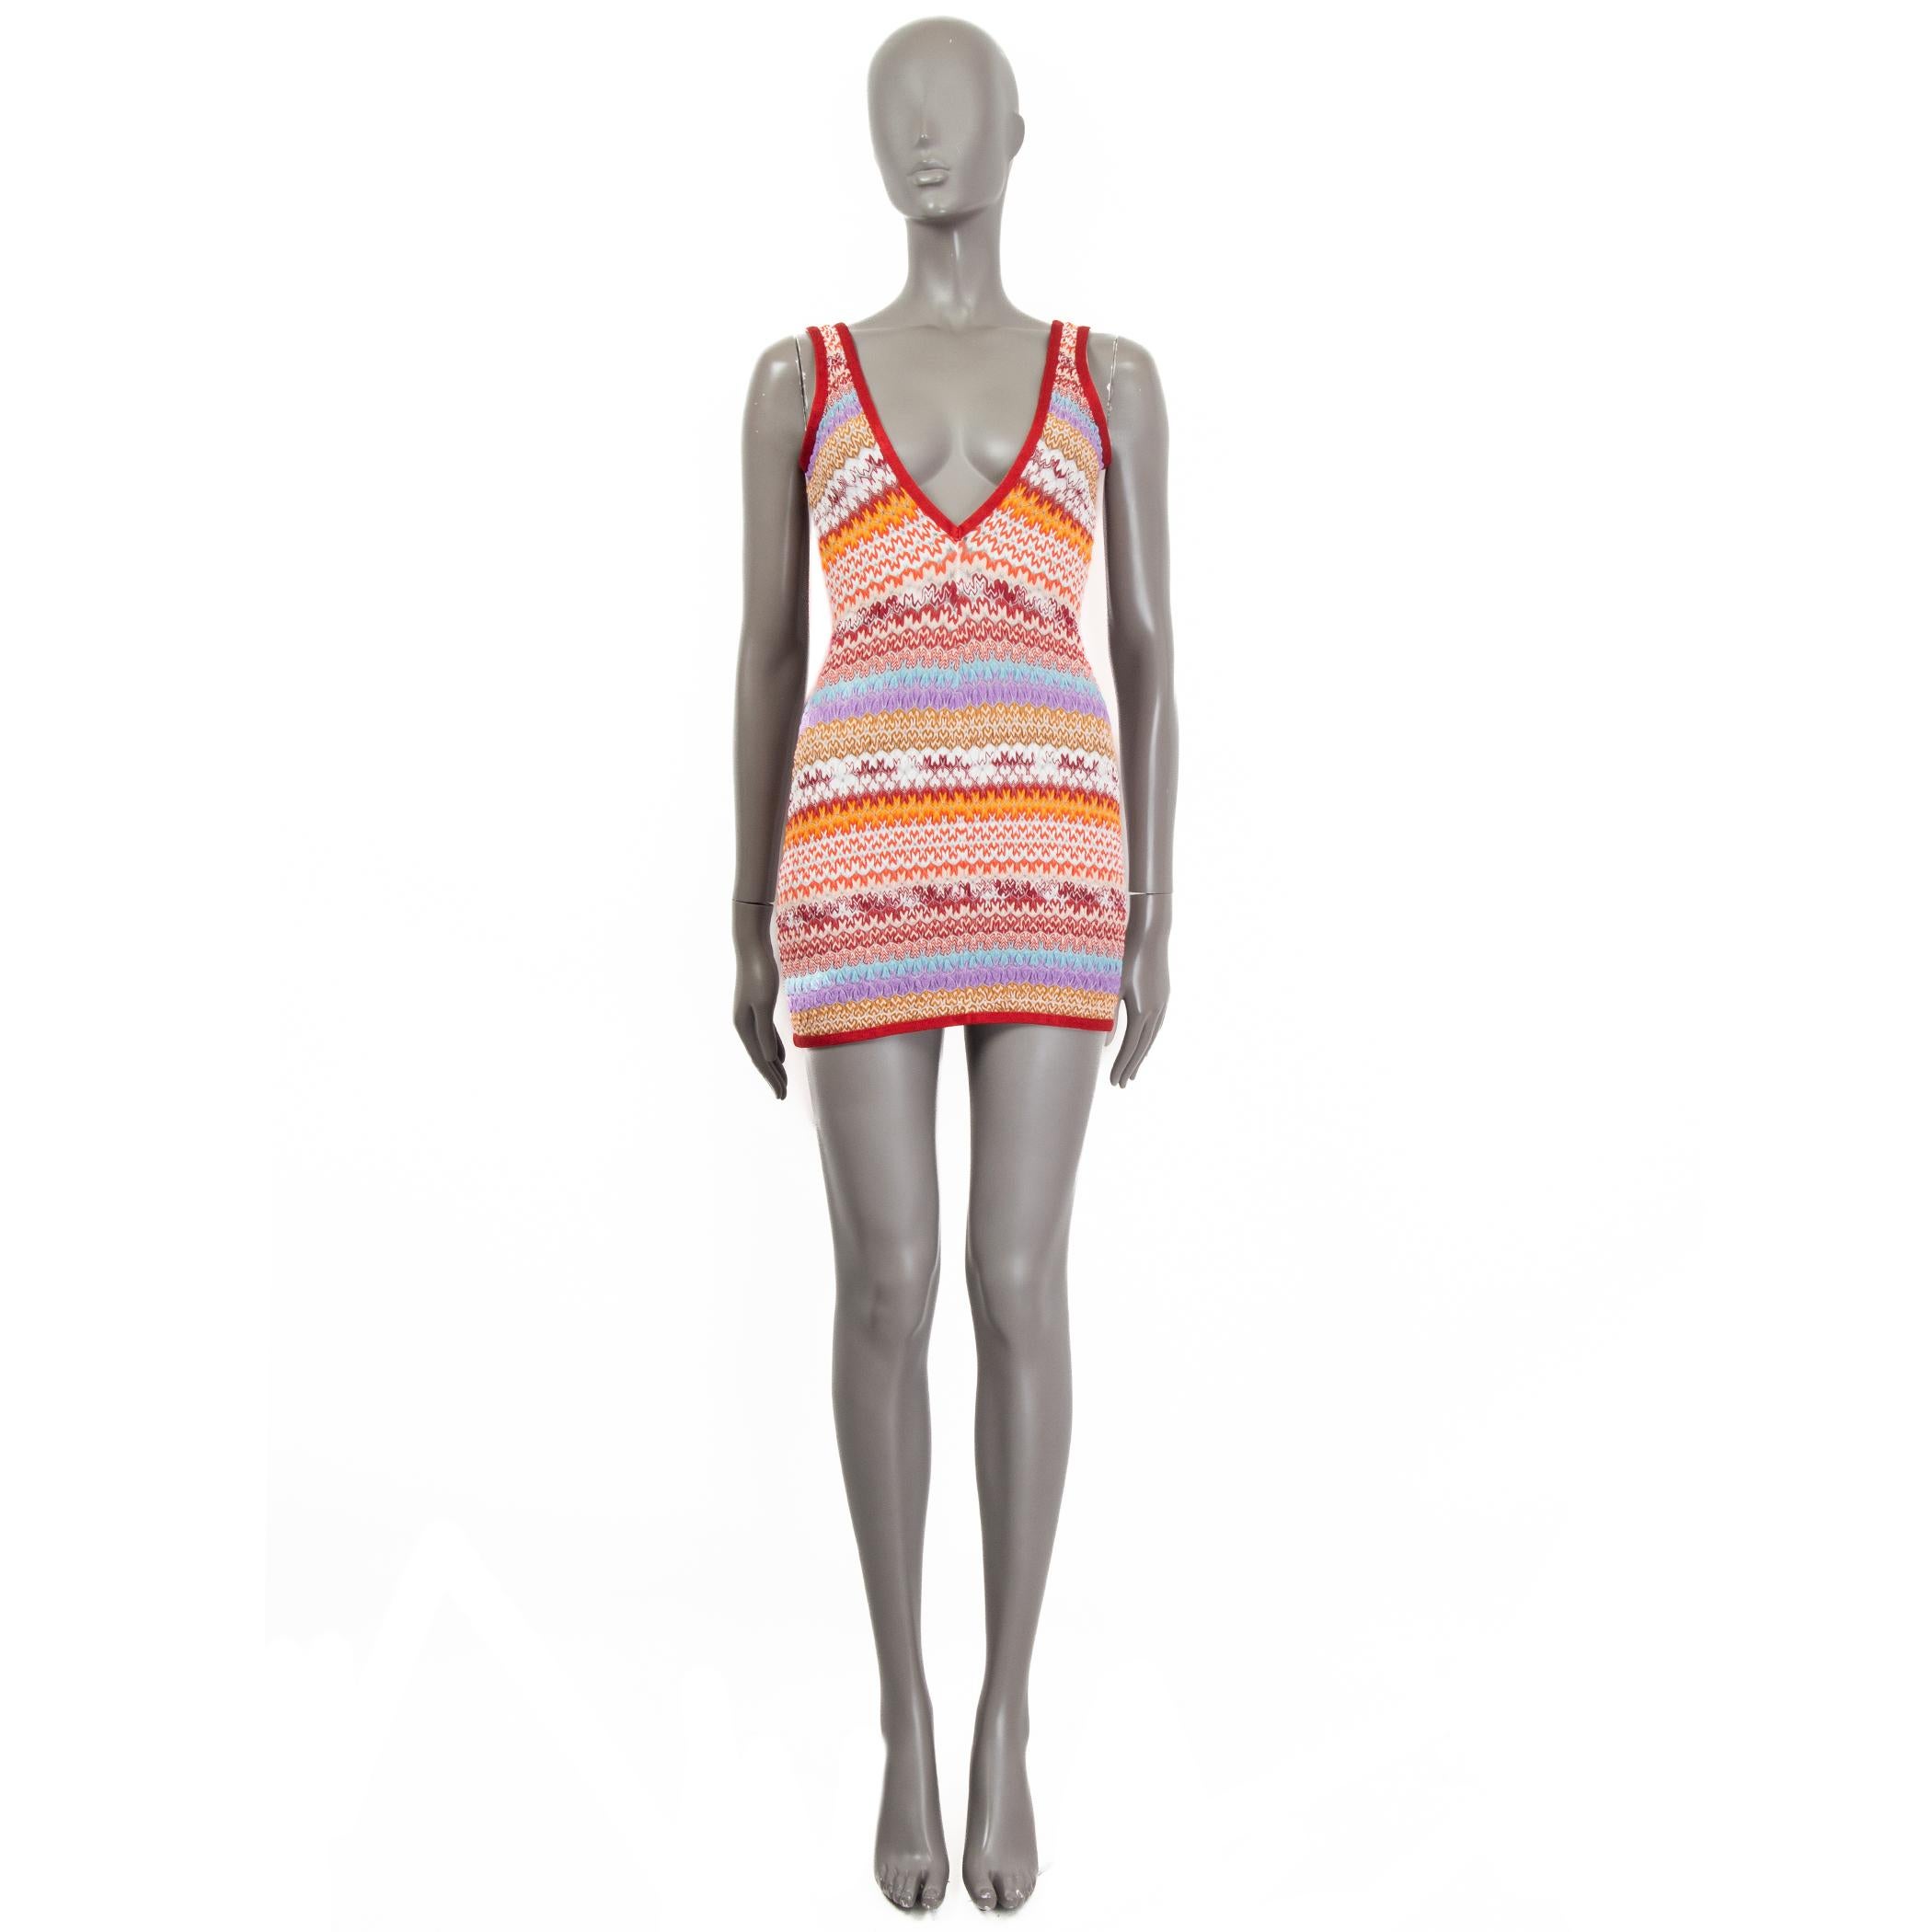 100% authentic Missoni Mare mini beach dress in blue, apricot, pink, light blue and off-white rayon (84%), nylon (11%) and elastane (5%). Features an open back. Unlined. Has been worn and is in excellent condition. 

Measurements
Tag